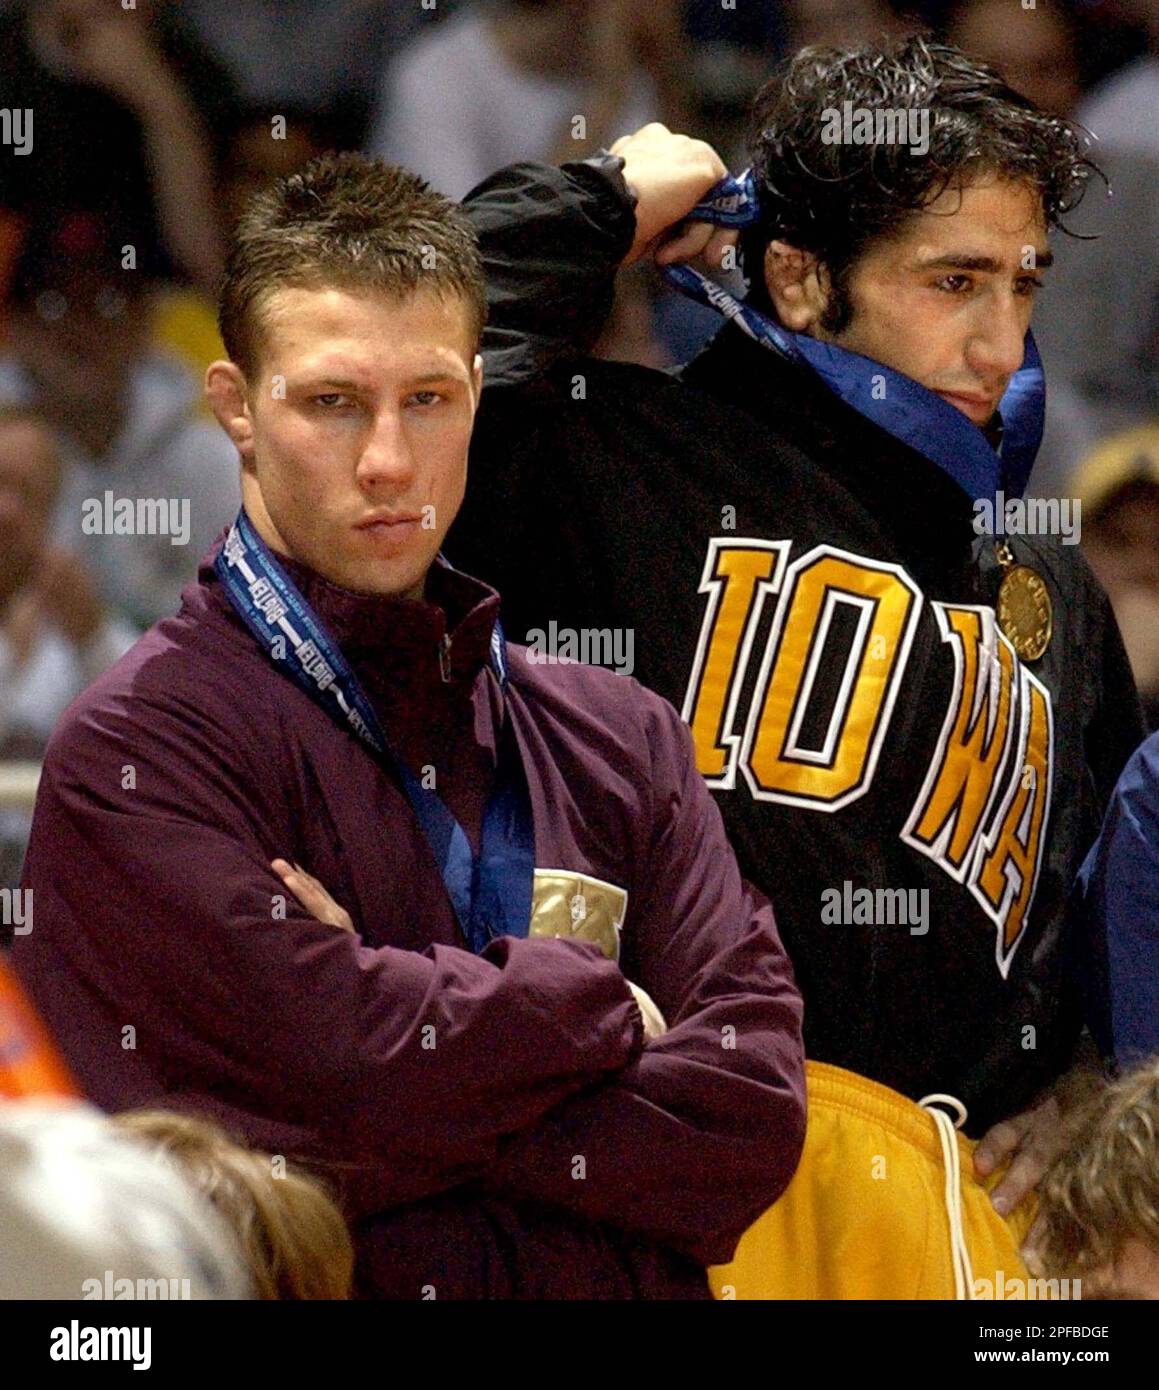 Minnesotas Jared Lawrence, left, reacts as Iowa's Mike Zadick, right, is  awarded the first-place medal in the 149-pound championship match at the  Big Ten wrestling tournament, Sunday, March 10, 2002, at Assembly